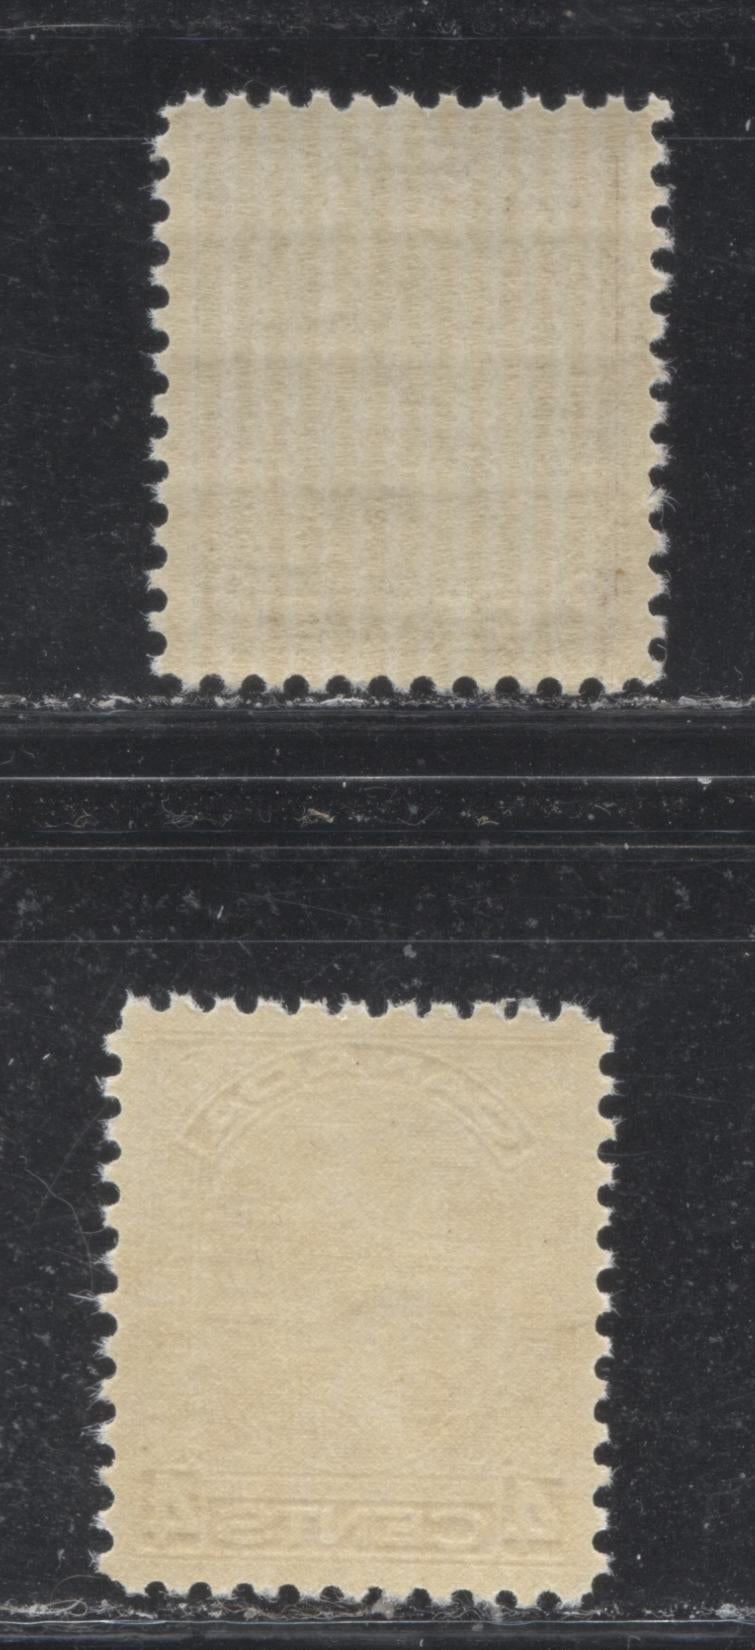 Lot 248 Canada # 196, 198i 2c & 4c Black Brown & Brownish Ochre King George V, 1932-1935 Medallion Issue, Two VFNH Examples, Cream Gum With a Satin Sheen